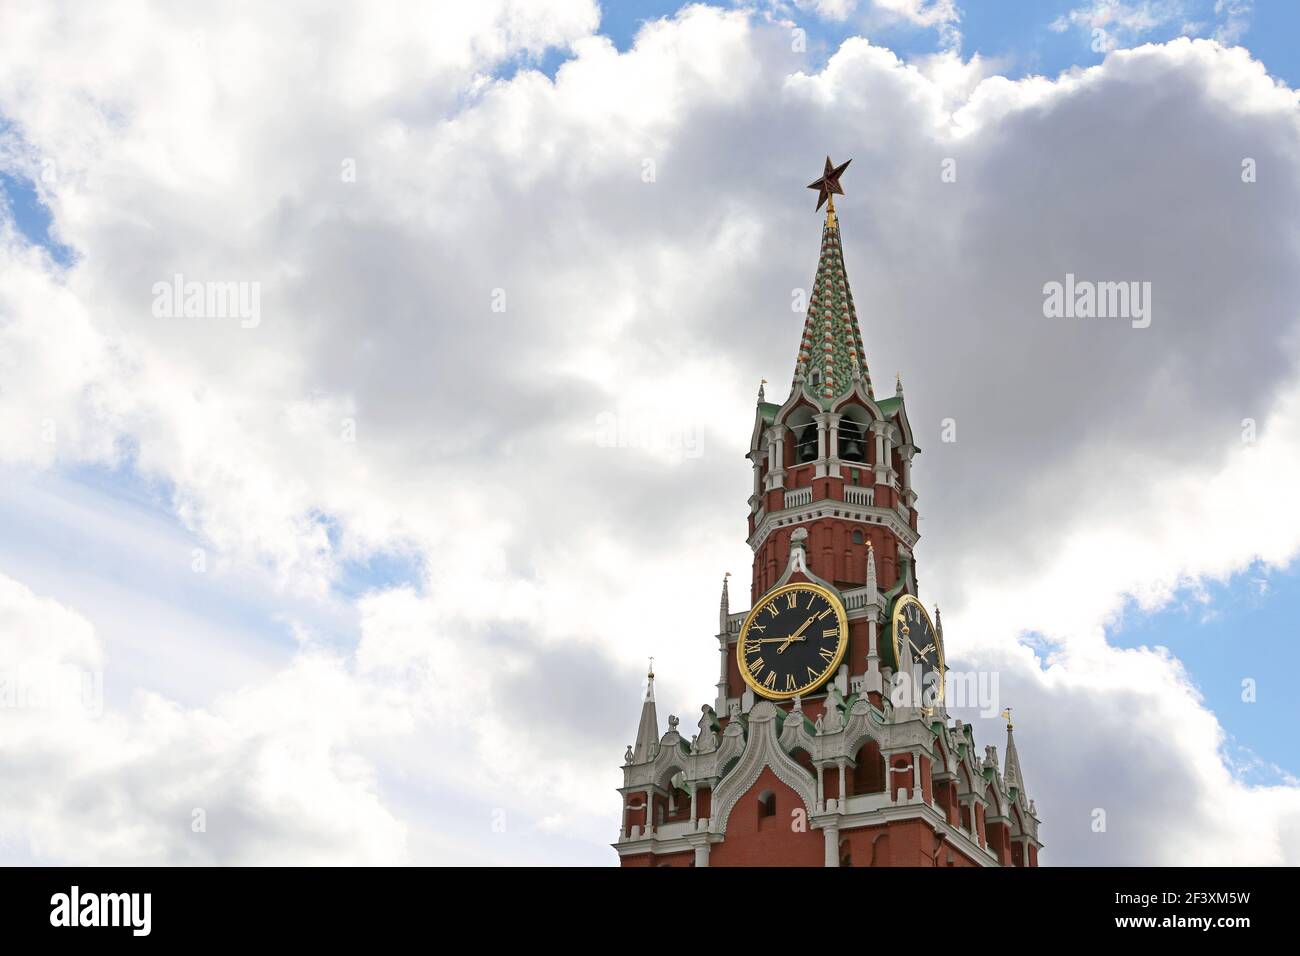 Chimes of Spasskaya tower, symbol of Russia on Red Square. Moscow Kremlin tower on blue sky and white clouds background Stock Photo